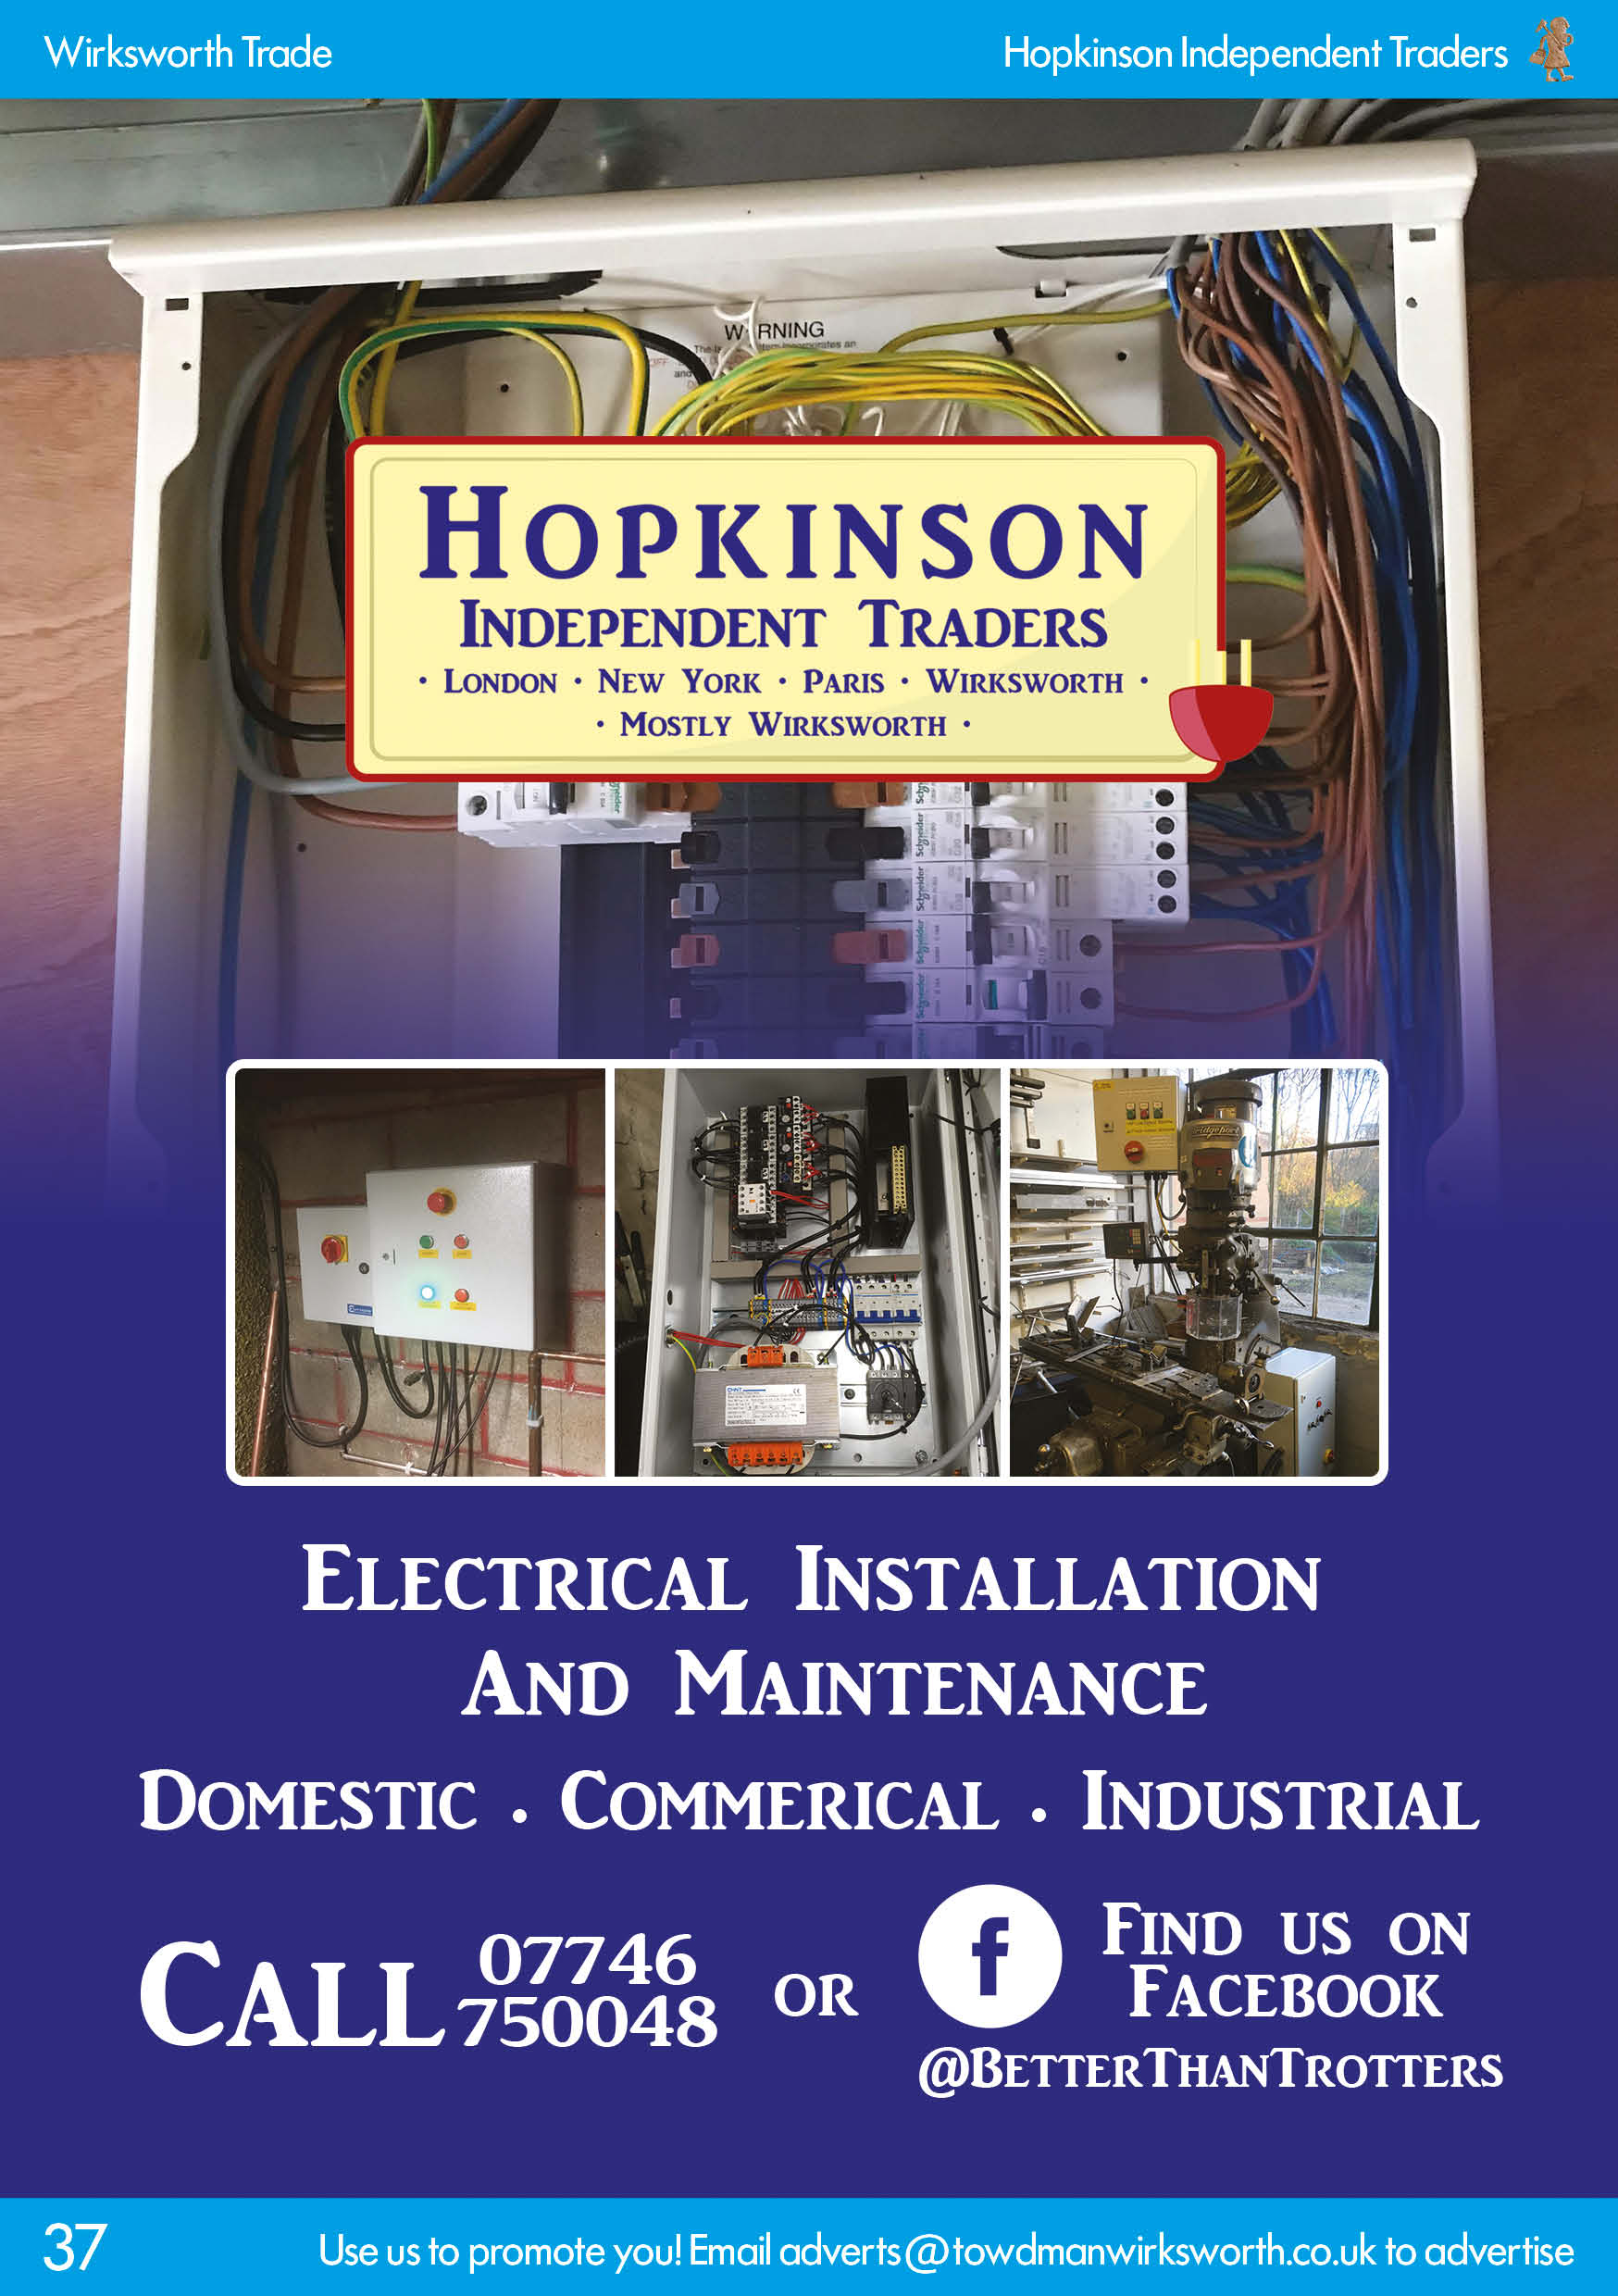 Hopkinson Independent Traders